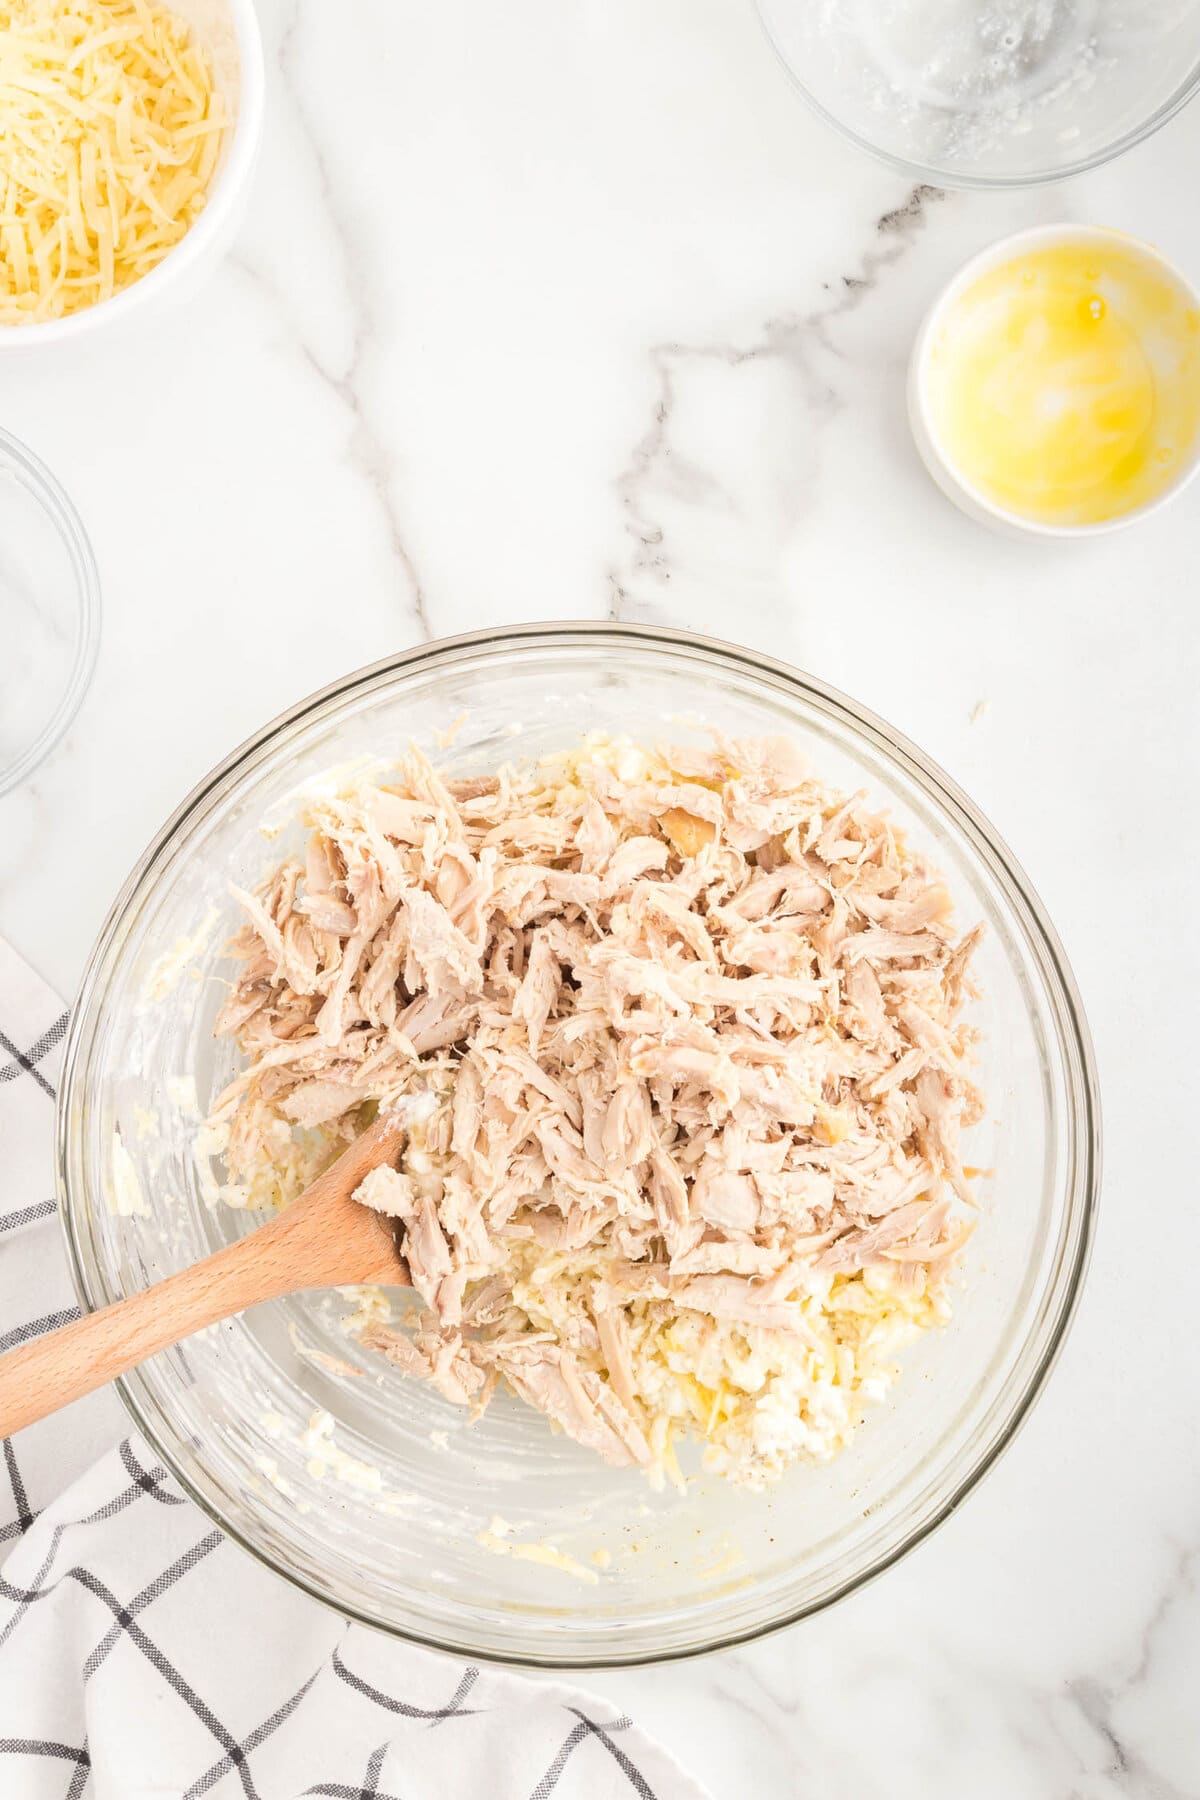 Adding cooked shredded chicken to cheese mixture for Mixing Chicken Alfredo Stuffed Shells cheeses in mixing bowl for Chicken Alfredo Stuffed Shells recipe